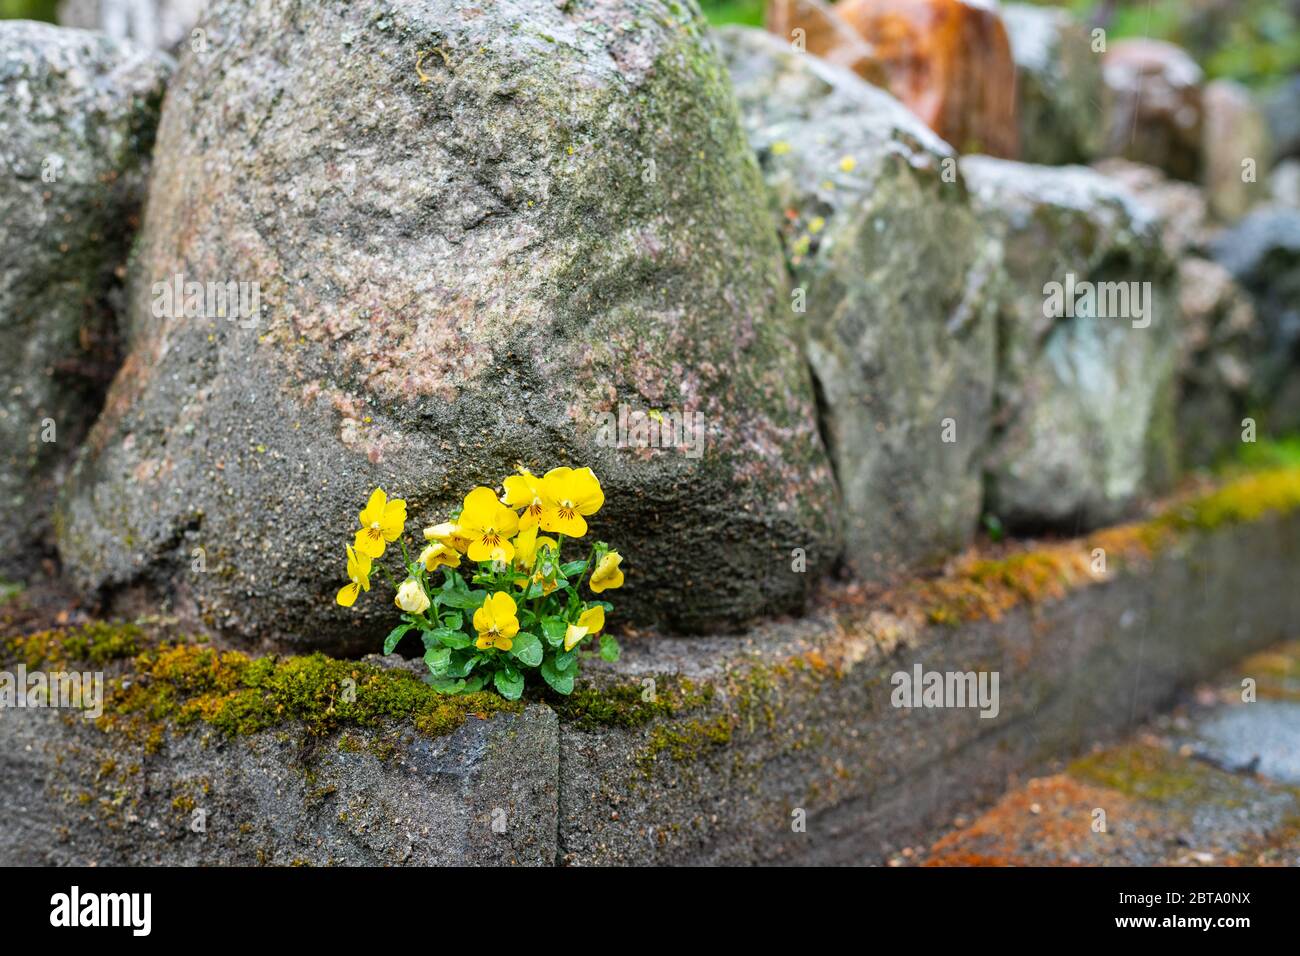 A  California golden violet (Viola pedunculata) grows between stones and sticks out in a rain shower Stock Photo